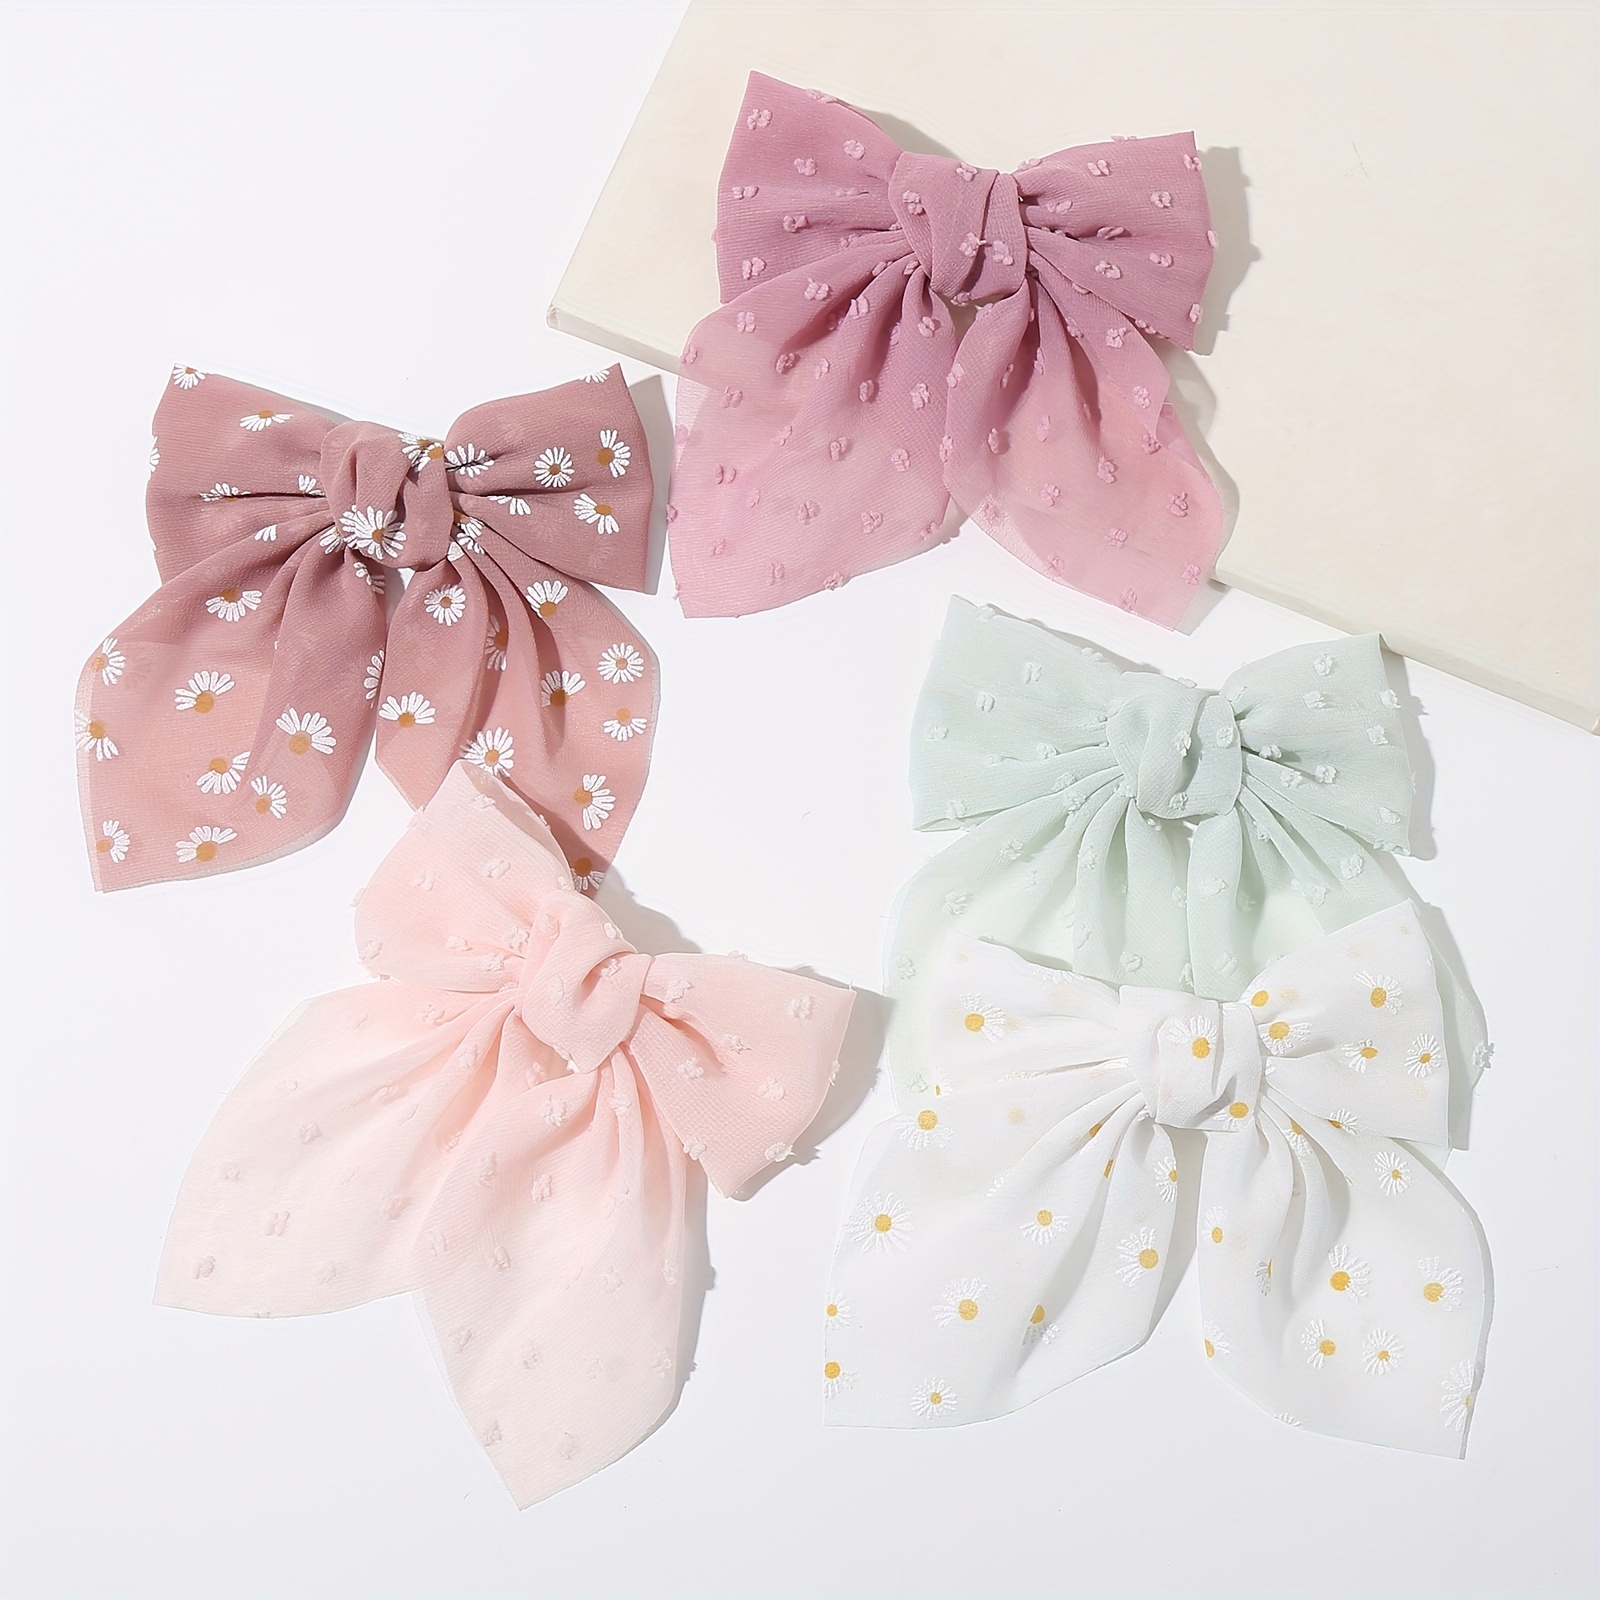 

5pcs/set Elegant Bowknot Shaped Hair Clips Butterfly Pattern Decorative Hair Barrettes Trendy Hair Accessories For Women And Daily Use